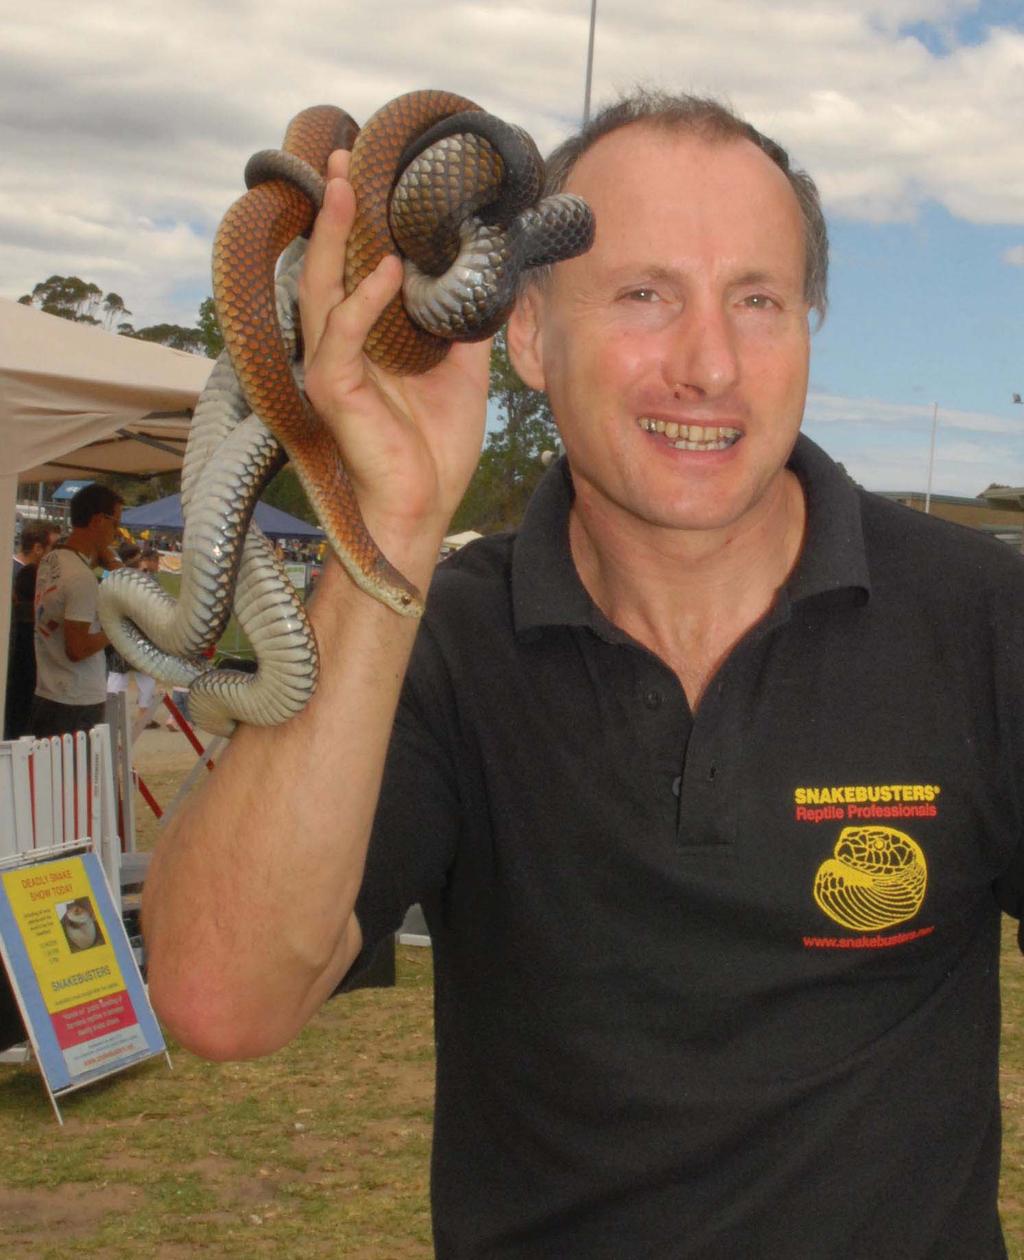 25 Hoser 2009-1:1-28 SNAKEBUSTERS - AUSTRALIA S BEST REPTILES IS PROUD TO